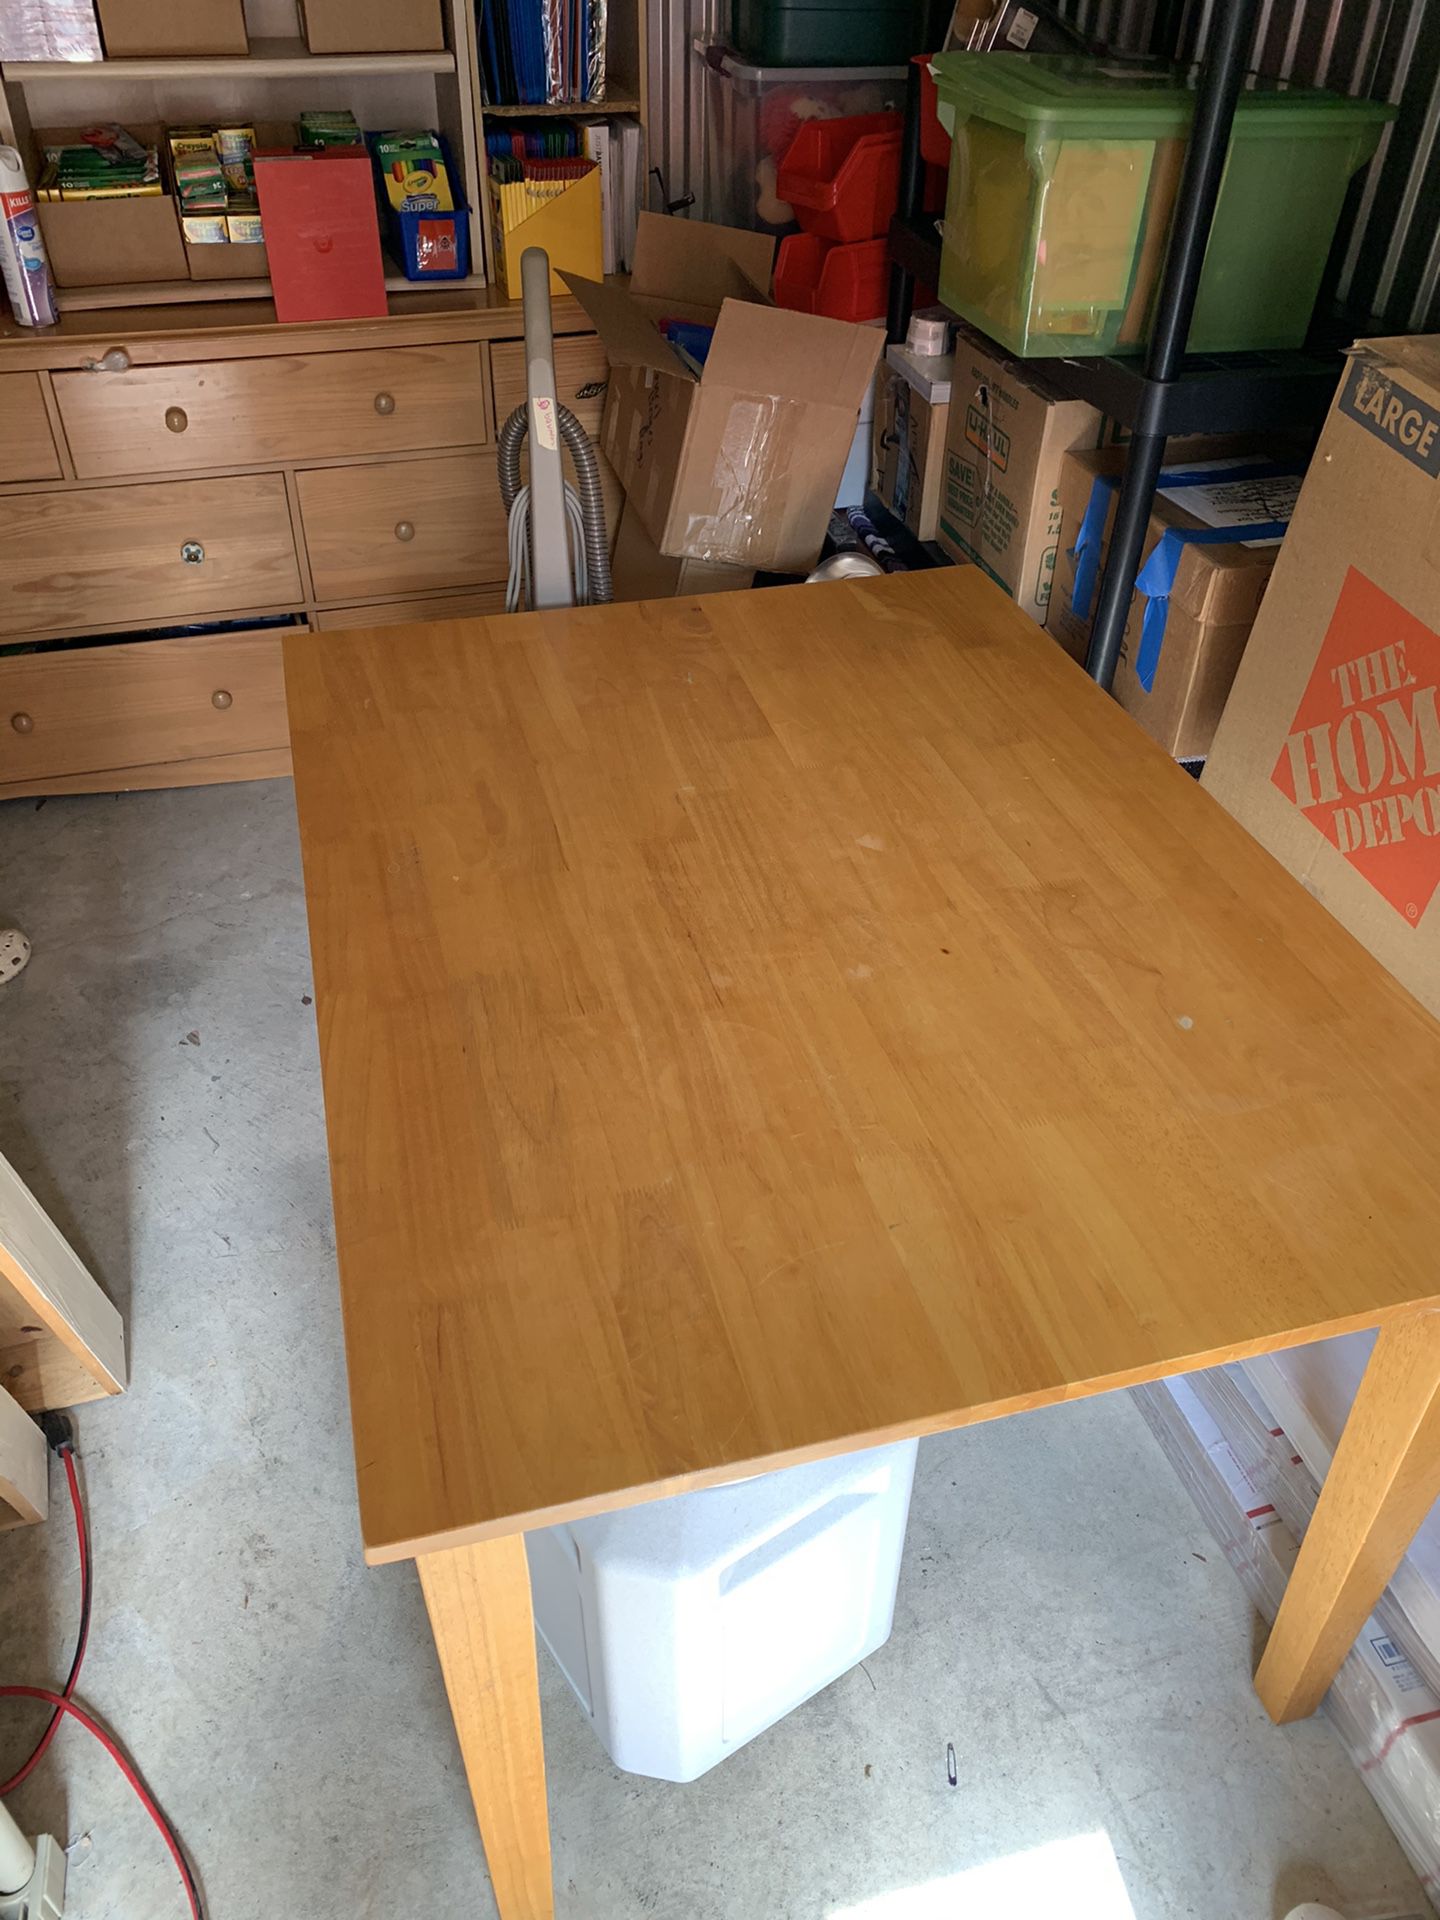 Kitchen Table + 2 Chairs